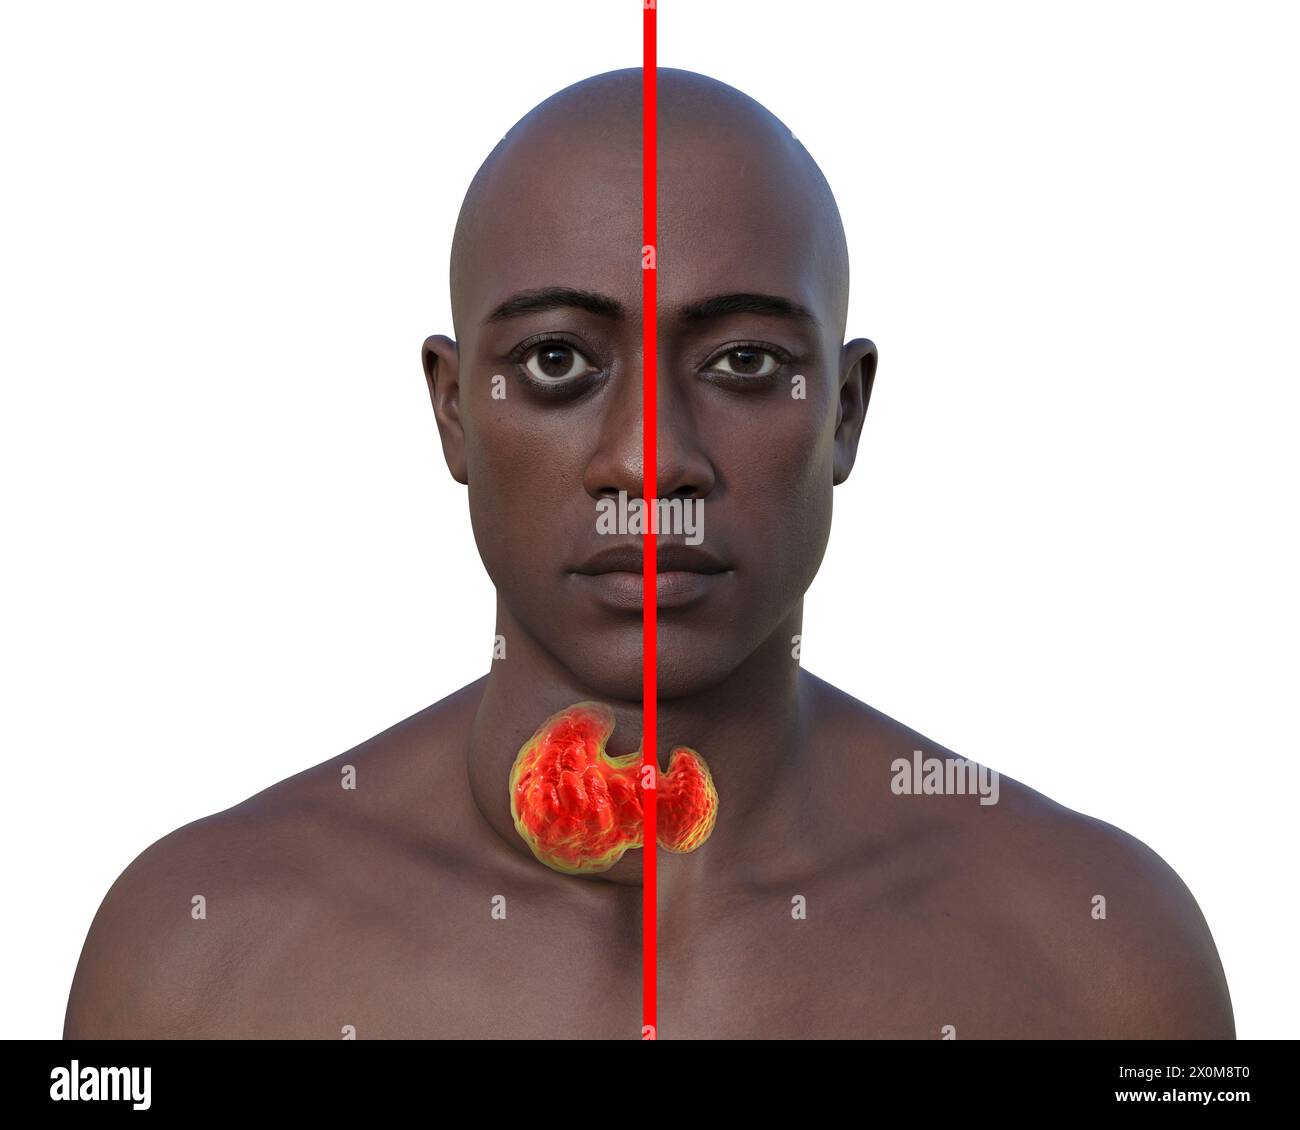 3D illustration of a man with an enlarged thyroid gland (goitre, base of neck) and abnormal protrusion of the eyes (exophthalmos), and the same man with healthy thyroid and eyes for comparison (right). These are two symptoms of an overactive thyroid gland, known as hyperthyroidism. Stock Photo